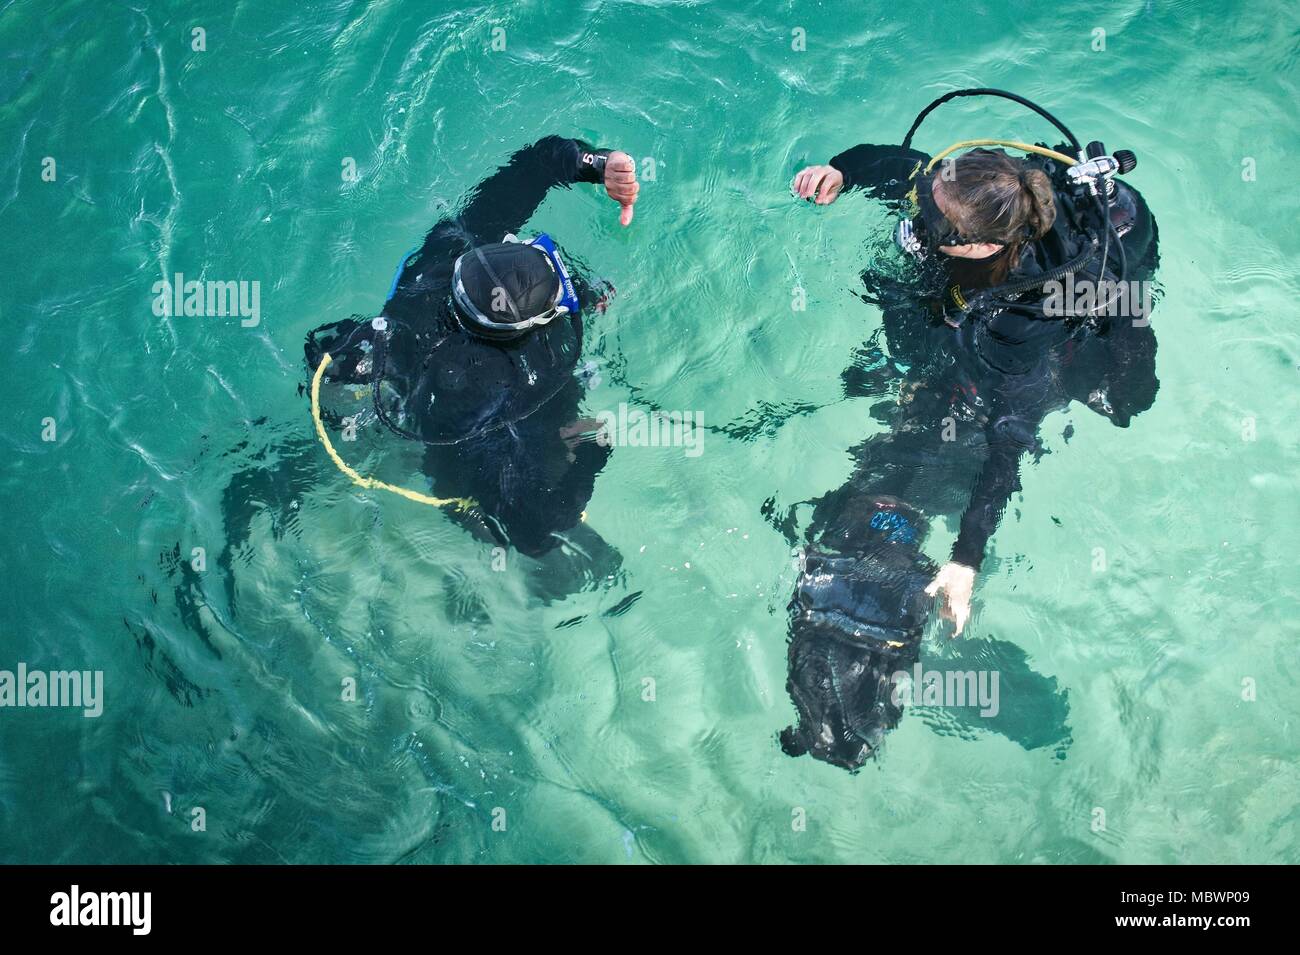 180108-N-XE158-0108 Mohammed Al-Ahmad Naval Base, KUWAIT (Jan. 8, 2018) Explosive Ordnance Disposal Technician 3rd Class Carolyn Willeford, right, assigned to Commander, Task Group 56.1, performs in-water checks during a scuba dive with a Kuwait Naval Force explosive ordnance disposal technician during a training evolution as part of exercise Eager Response 18. Eager Response 18 is a bilateral explosive ordnance disposal military exercise between the State of Kuwait and the United States. The exercise fortifies military-to-military relationships between the Kuwait Naval Force and U.S. Navy, ad Stock Photo